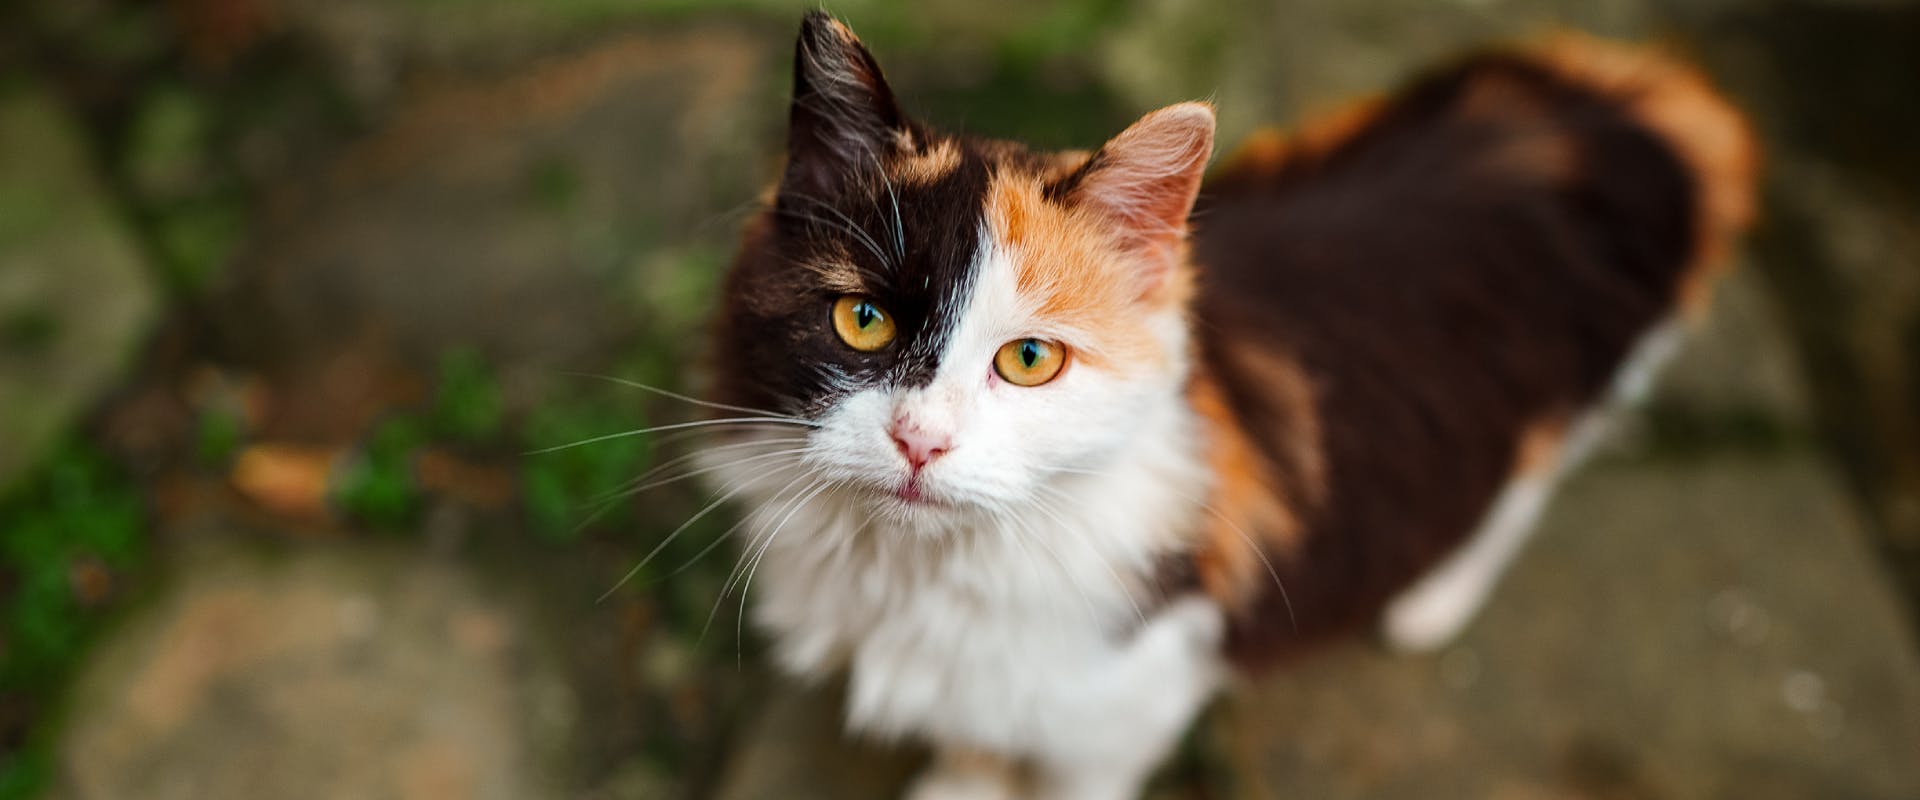 a long-haired calico cat looking up at the camera as it's stood on a concrete walkway